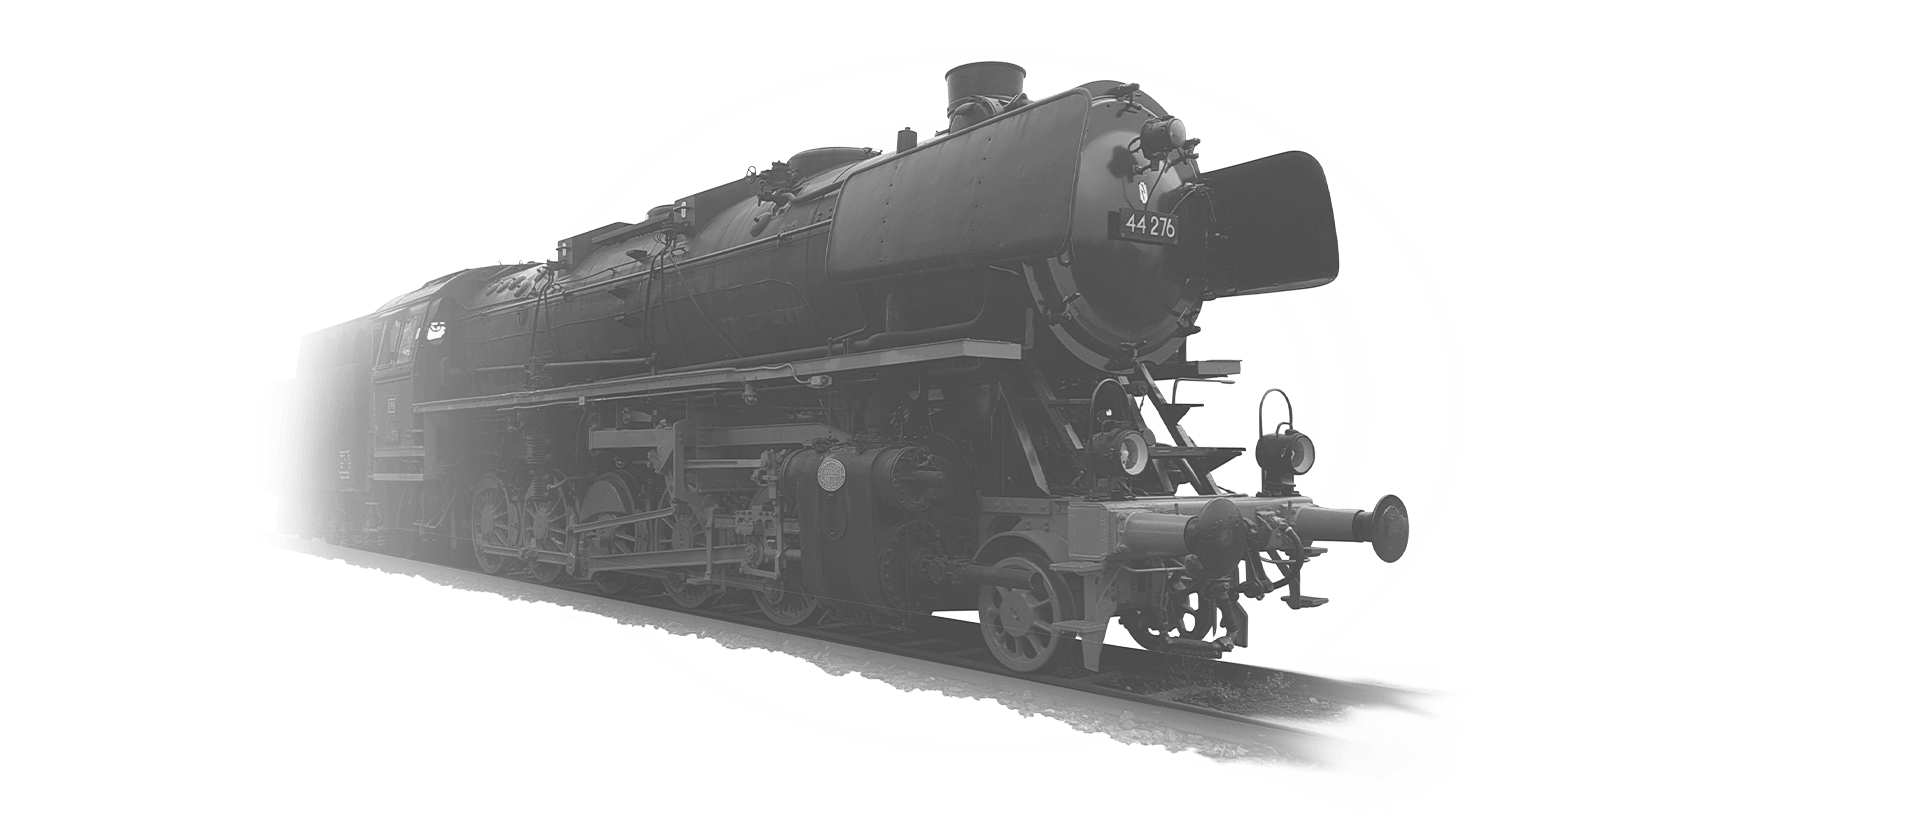 The locomotive 44-276 is coming towards the camera in black and white